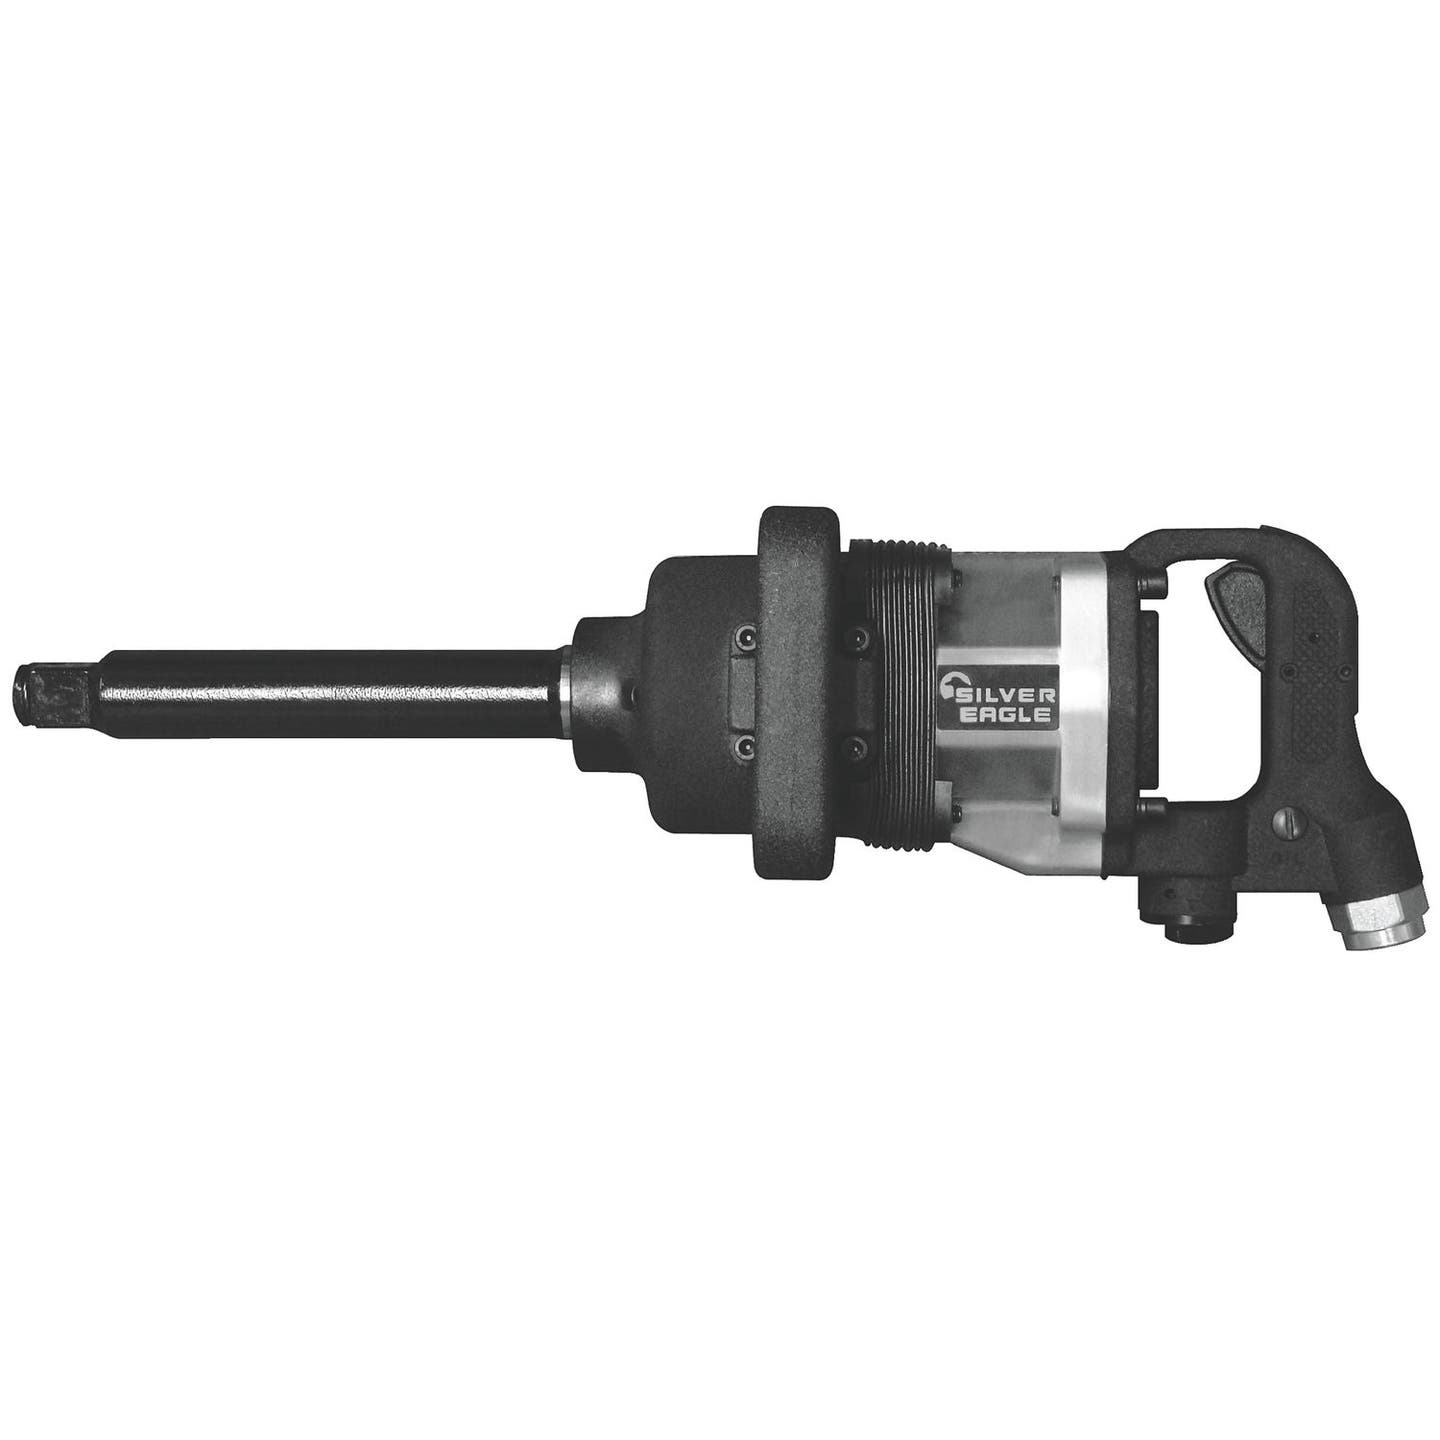 1" DRIVE PNEUMATIC SILVER EAGLE® IMPACT WRENCH